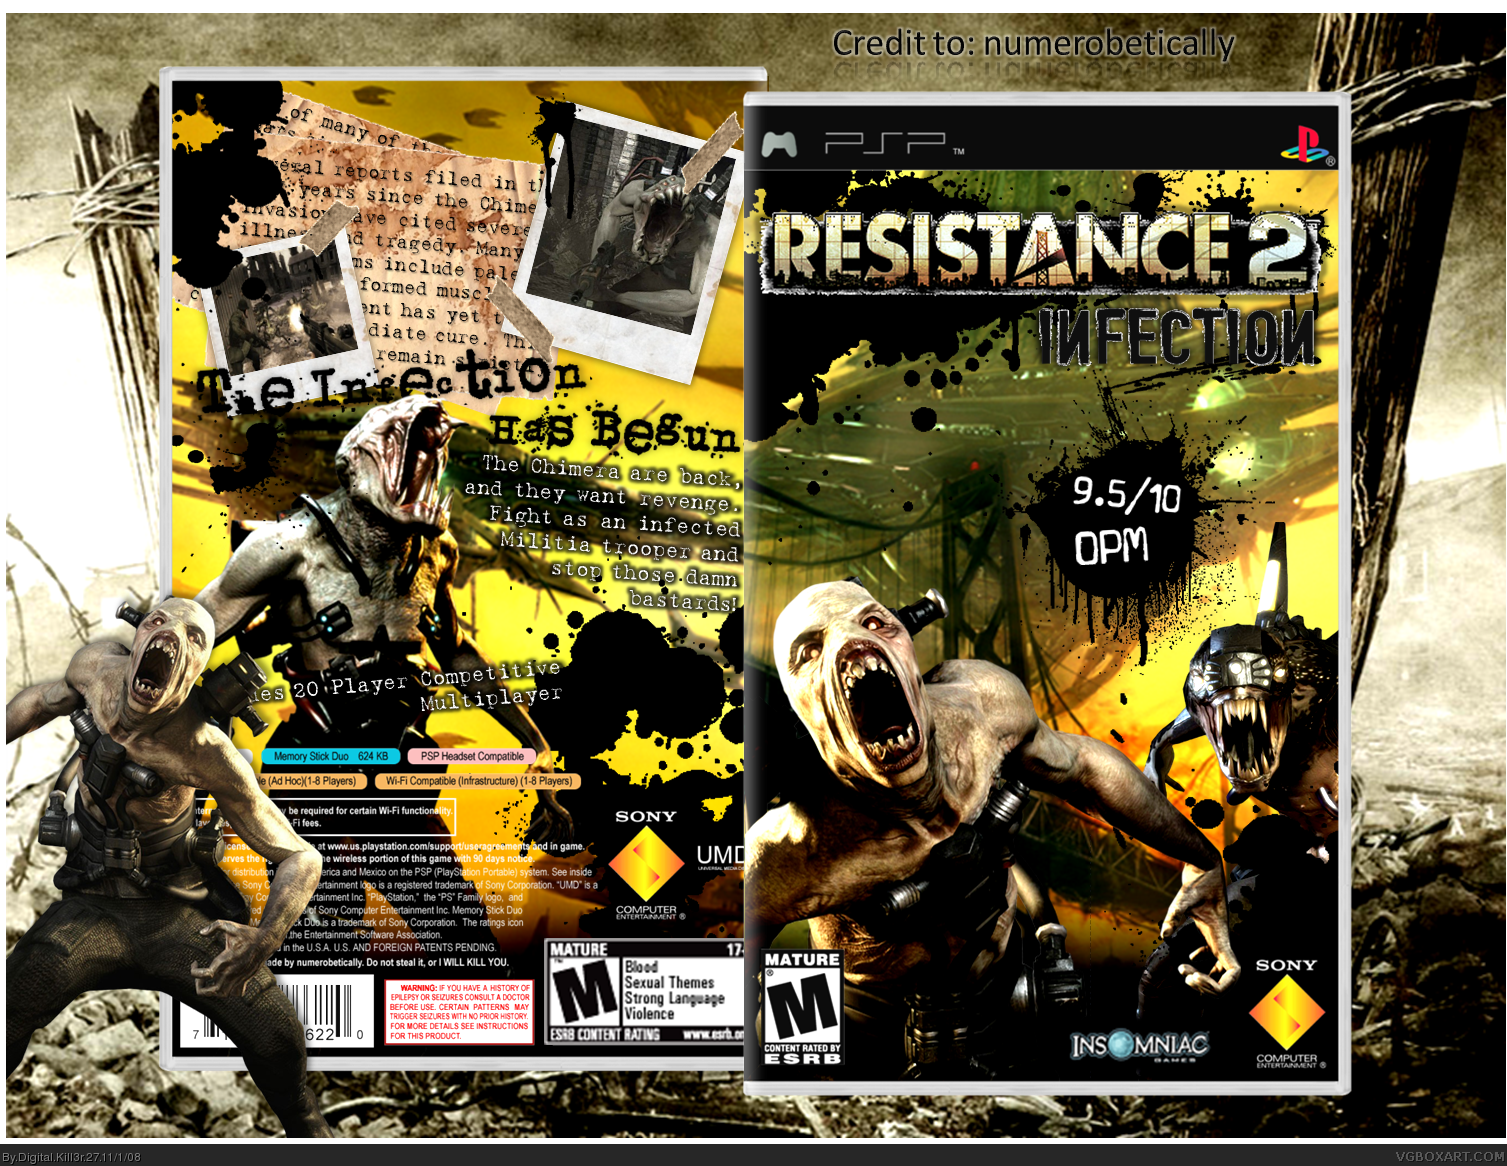 Resistance 2: Infection box cover